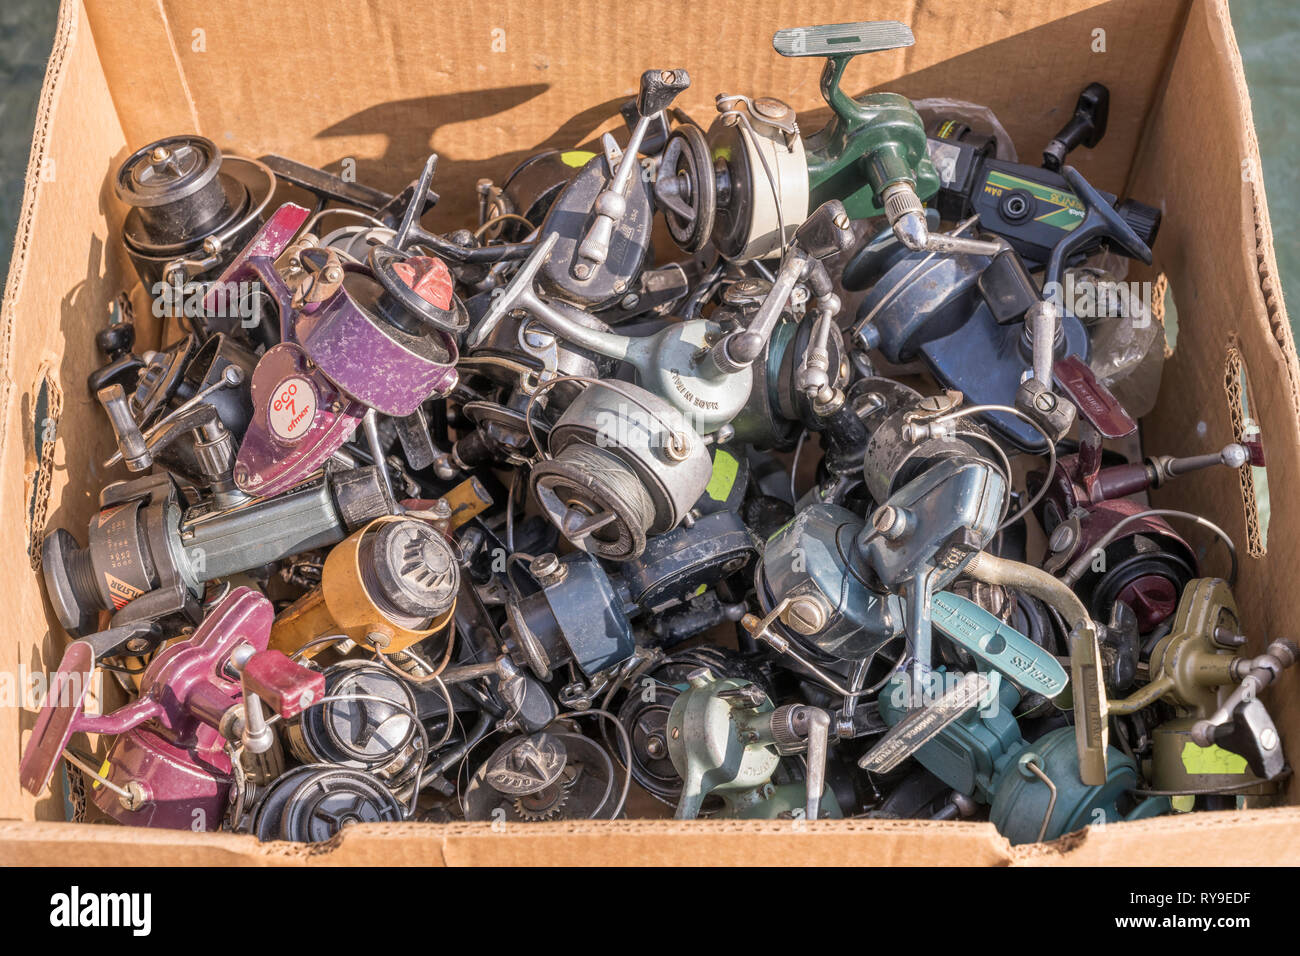 CREMONA, ITALY -FEBRUARY 17: box with heap of old fishing reels on